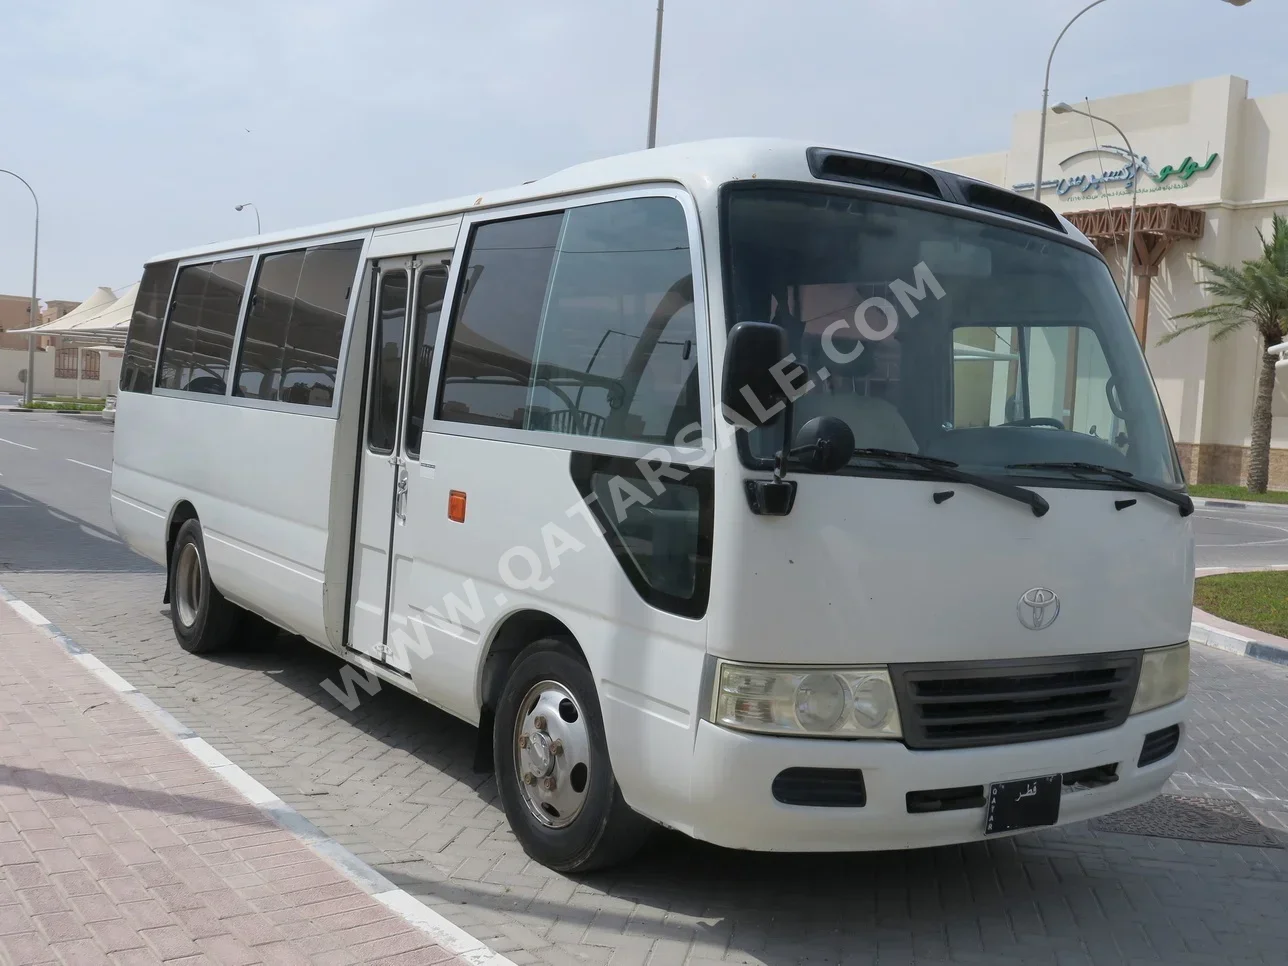 Toyota  Coaster  2015  Manual  228,000 Km  4 Cylinder  Front Wheel Drive (FWD)  Van / Bus  White